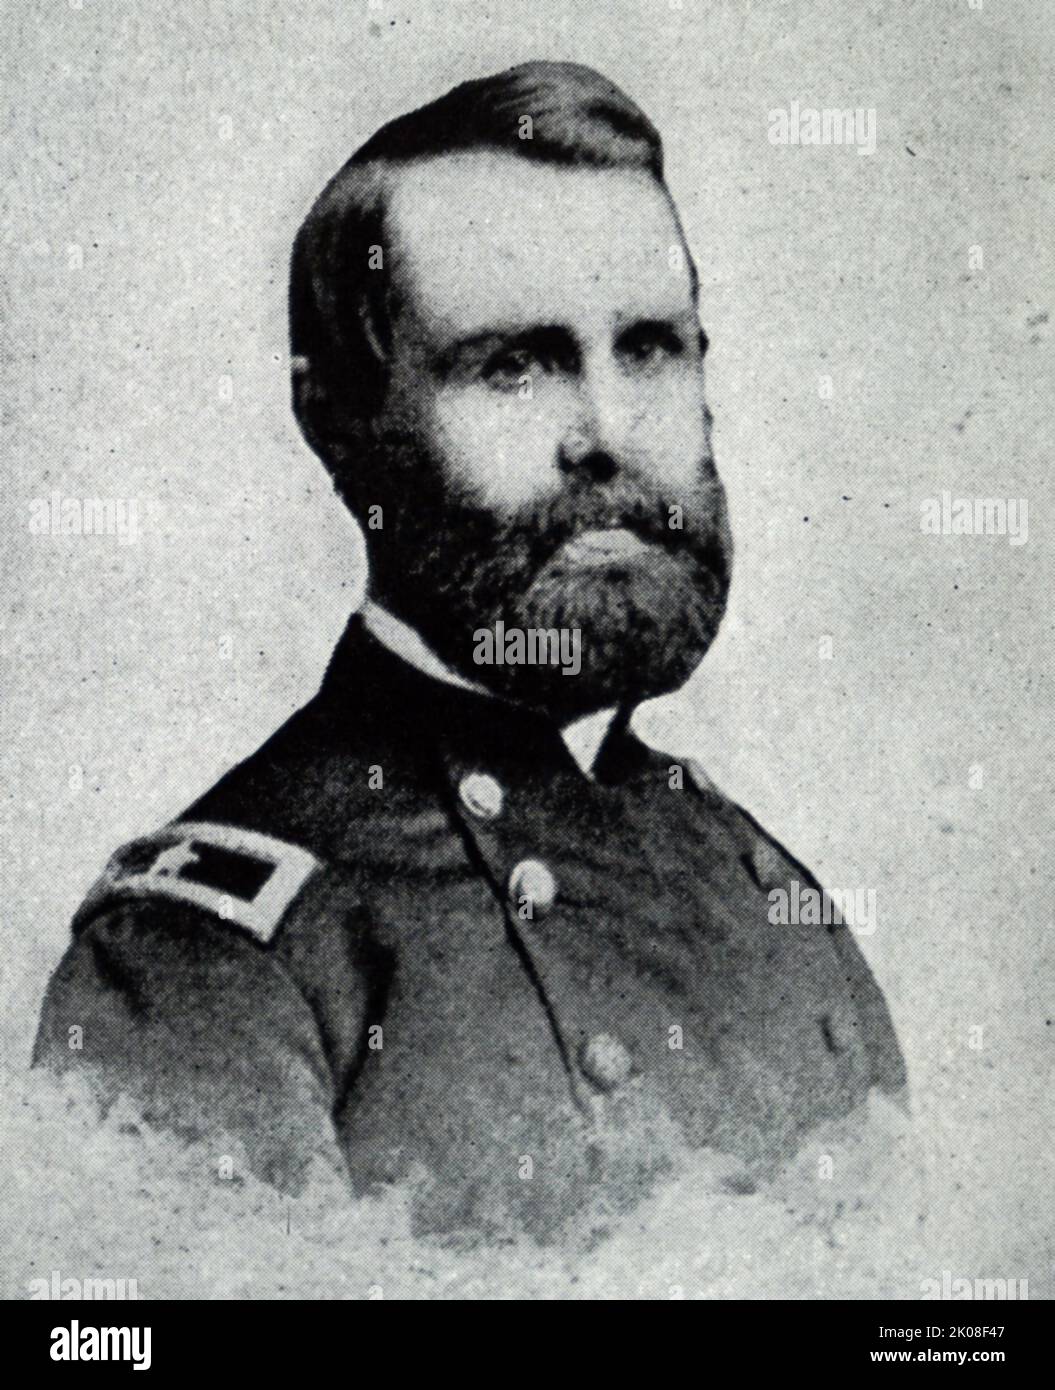 General J. D. Cox. Jacob Dolson Cox, Jr. (October 27, 1828 - August 4, 1900), was a statesman, lawyer, Union Army general during the American Civil War, Republican politician from Ohio, Liberal Republican Party founder, educator, author, and recognized microbiologist Stock Photo